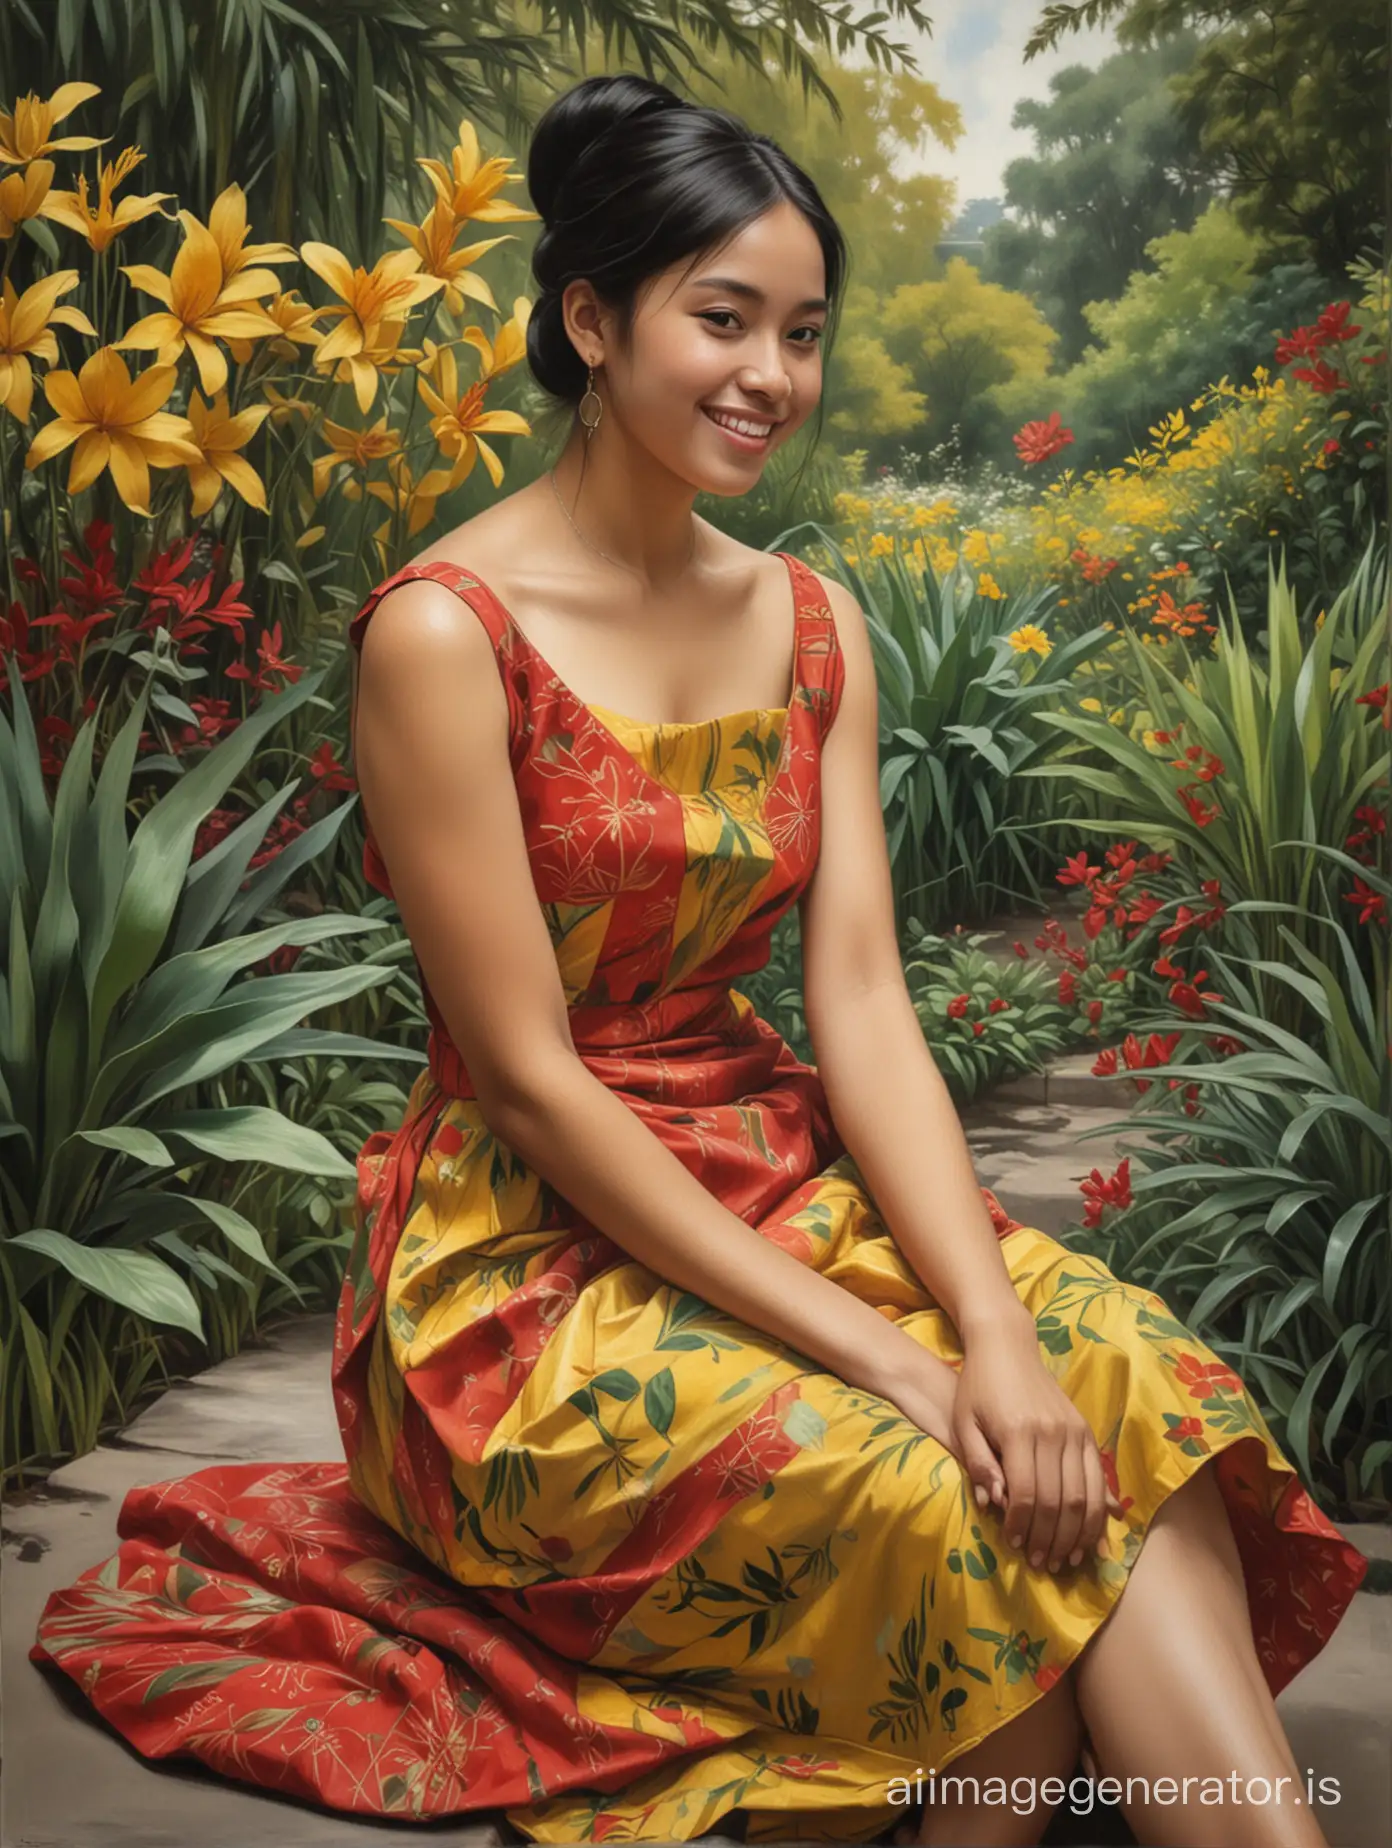 Indonesian-Beauty-in-a-Botanical-Garden-DegasStyle-Oil-Painting